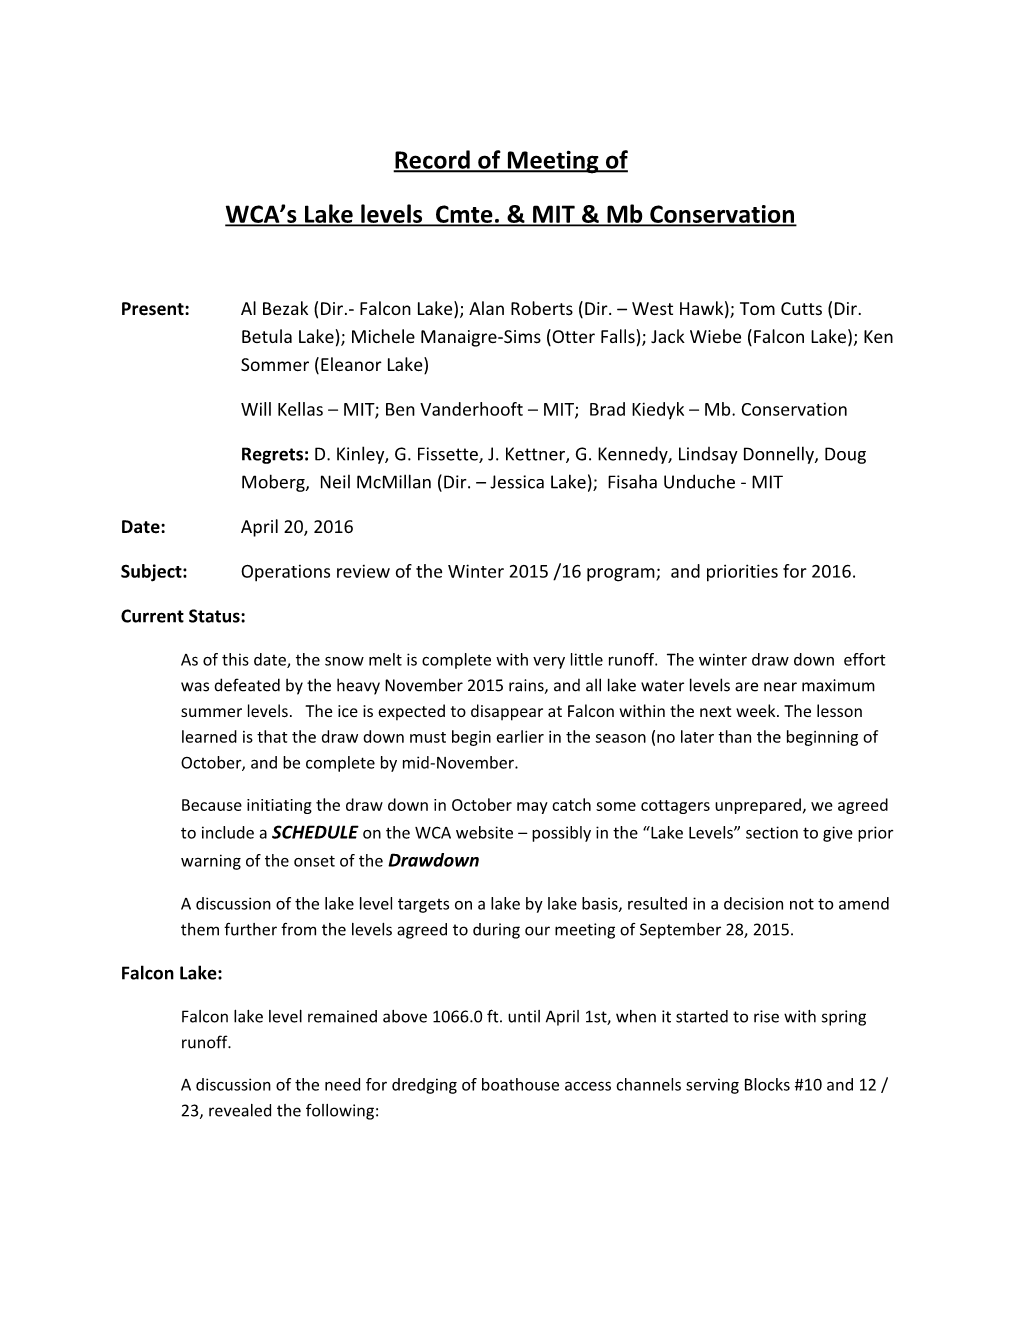 WCA S Lake Levels Cmte. & MIT & Mb Conservation